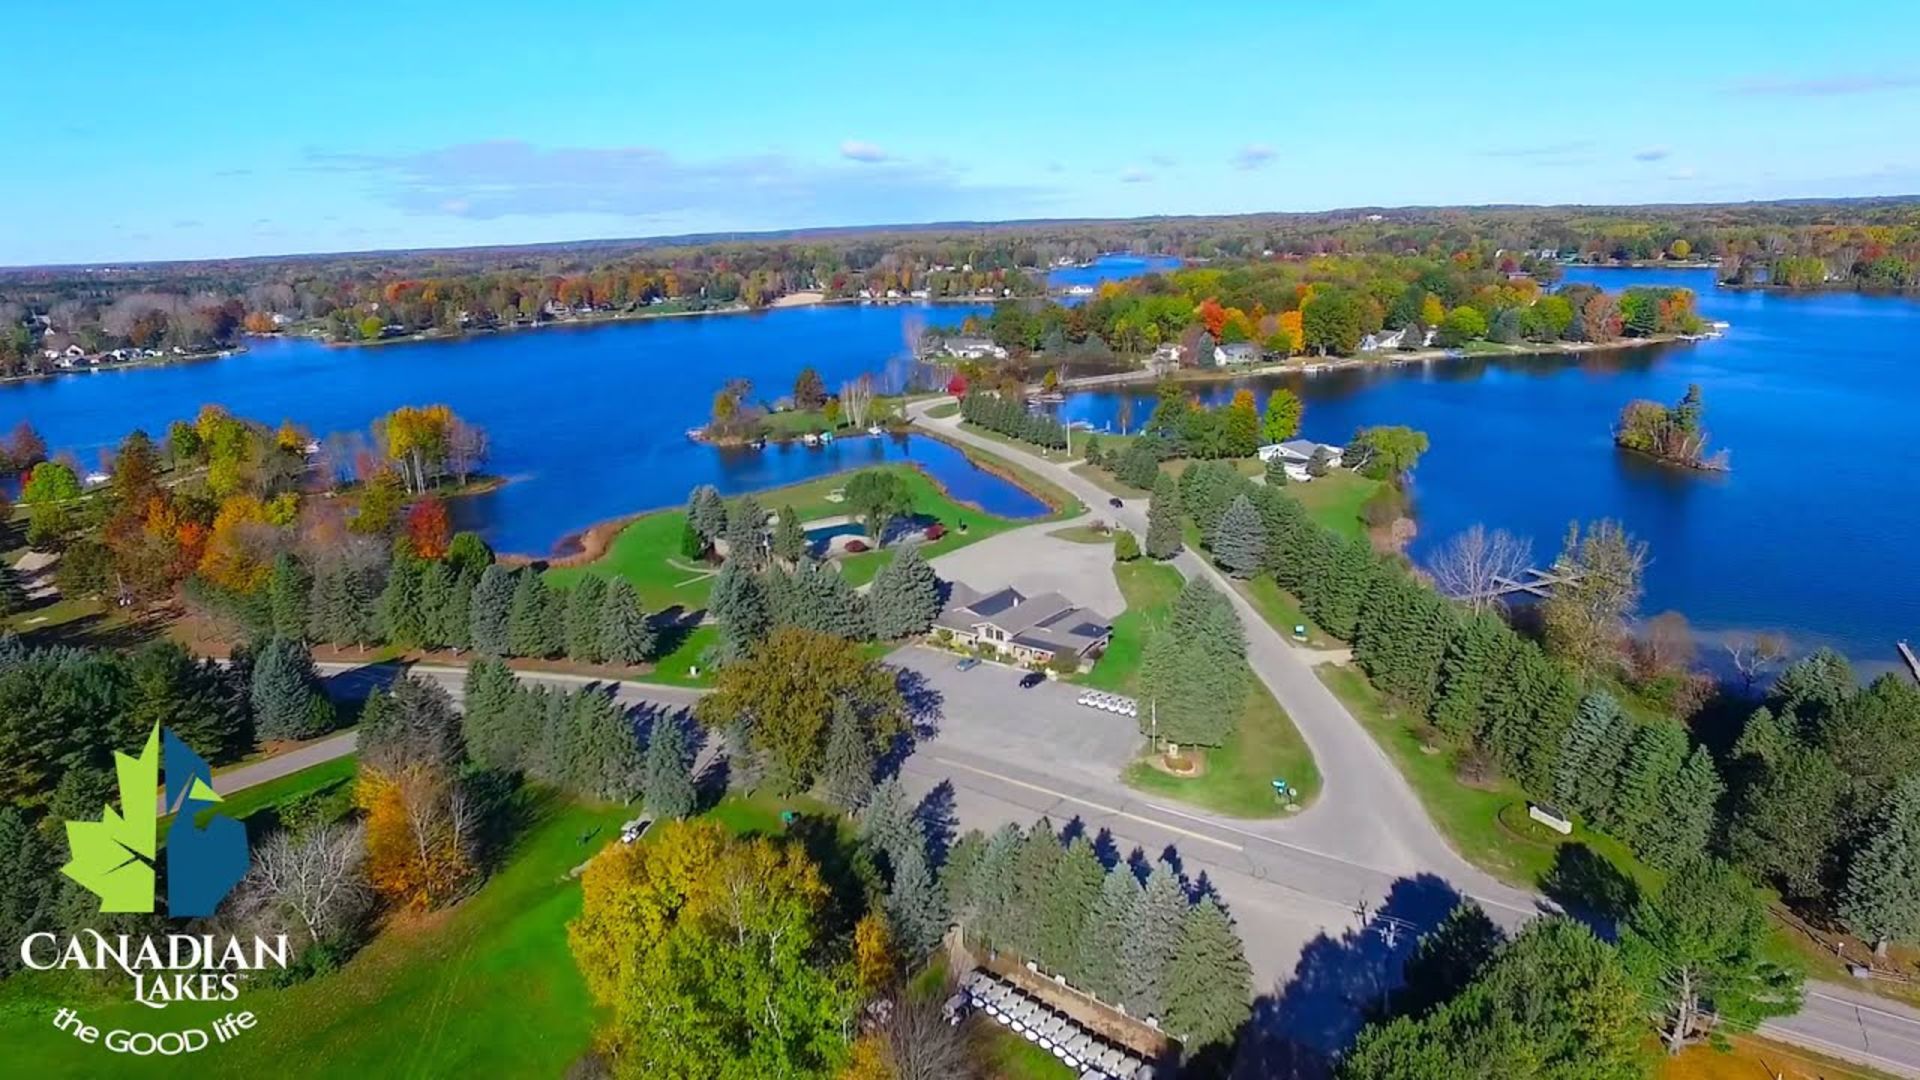 Endless Golf, Lakes, and Parks in Canadian Lakes, Mecosta County, Michigan! - Image 2 of 15